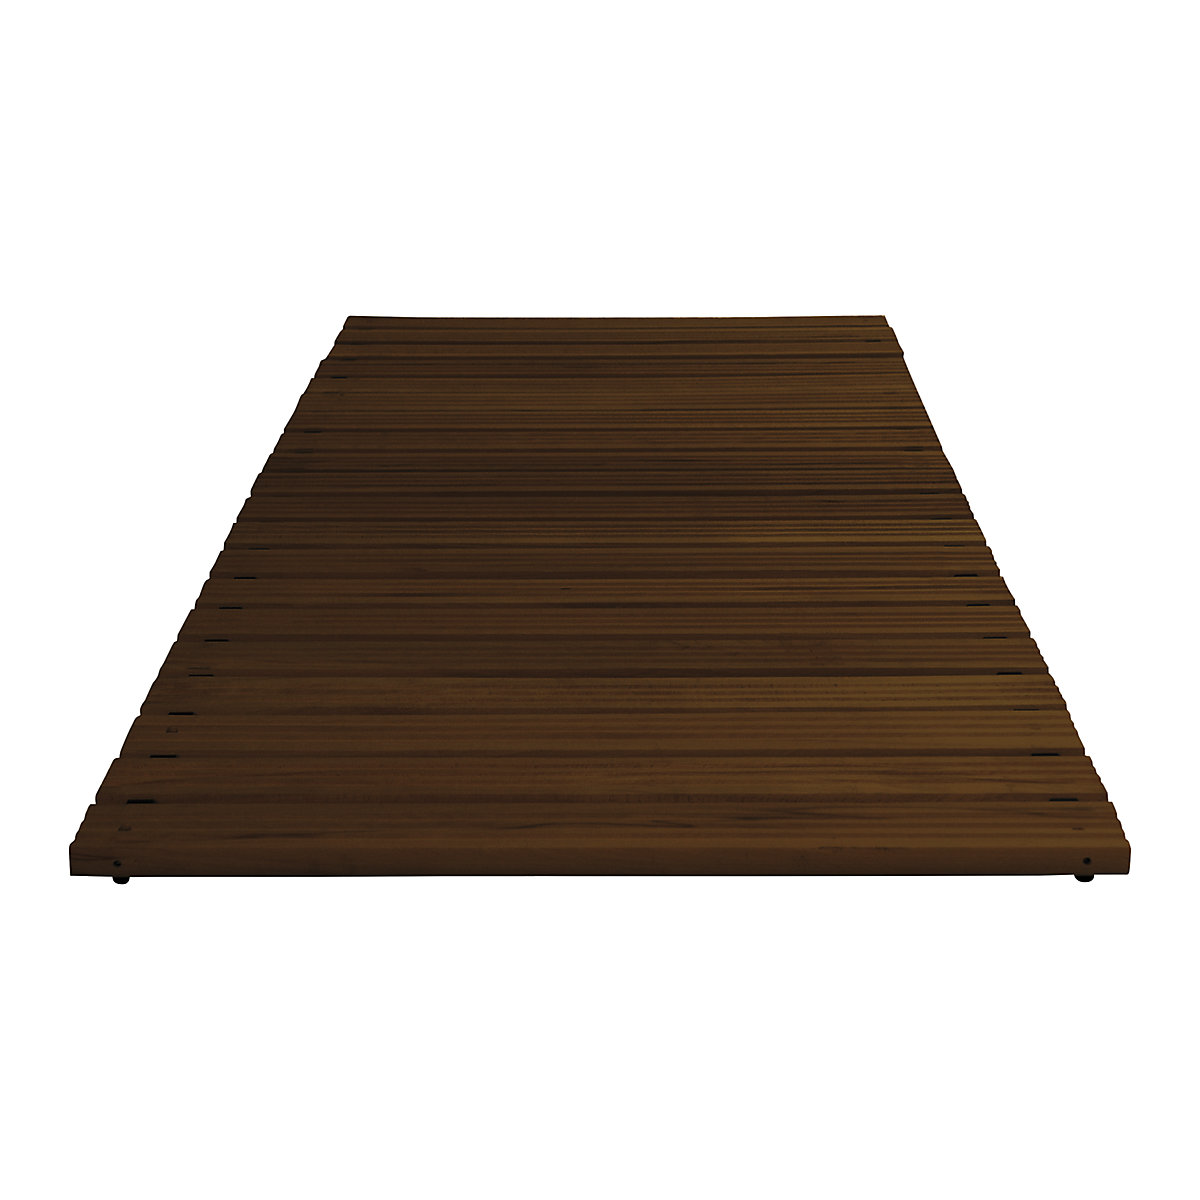 Wooden safety grid, dark stain, per metre, without bevelled edge, width 800 mm